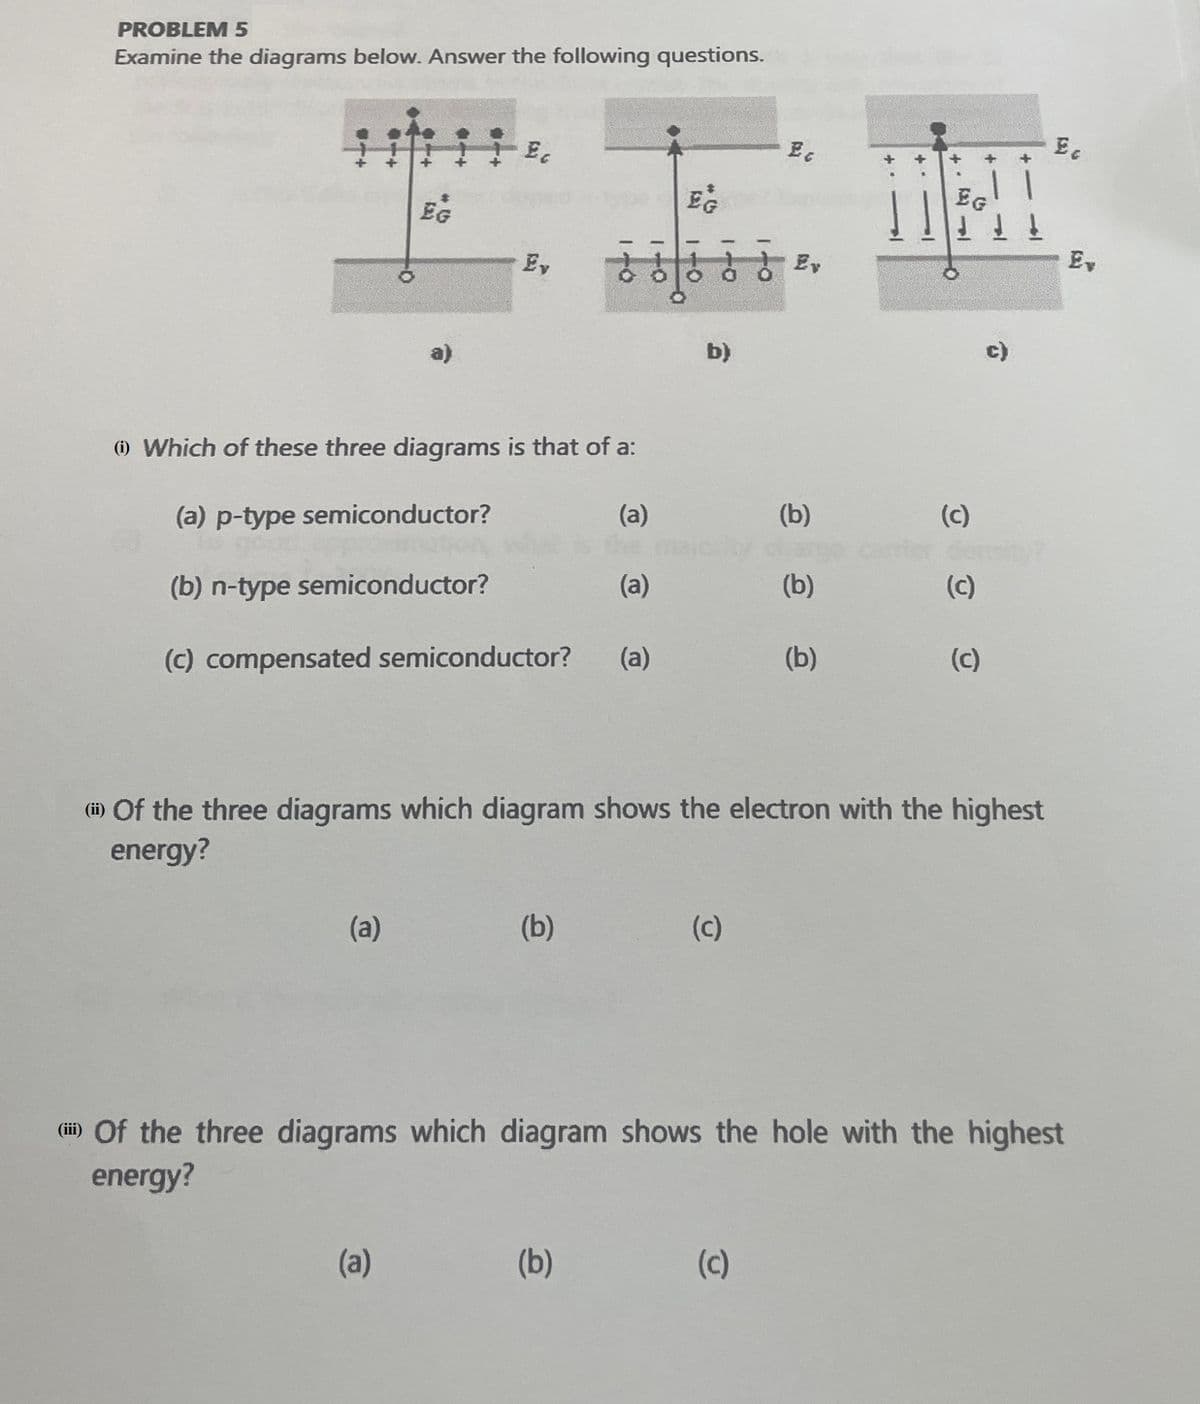 PROBLEM 5
Examine the diagrams below. Answer the following questions.
-0
EG
Ev
a)
100
1+0
(i) Which of these three diagrams is that of a:
(a) p-type semiconductor?
EG
1-0
170
b)
Ec
Ev
+
+
+
EG
!!!
c)
Ec
(a)
(b)
(c)
(a)
(b)
(c)
(b)
(c)
(b) n-type semiconductor?
(c) compensated semiconductor? (a)
Ev
(ii) of the three diagrams which diagram shows the electron with the highest
energy?
(a)
(b)
(c)
(ii) of the three diagrams which diagram shows the hole with the highest
energy?
(a)
(b)
(c)